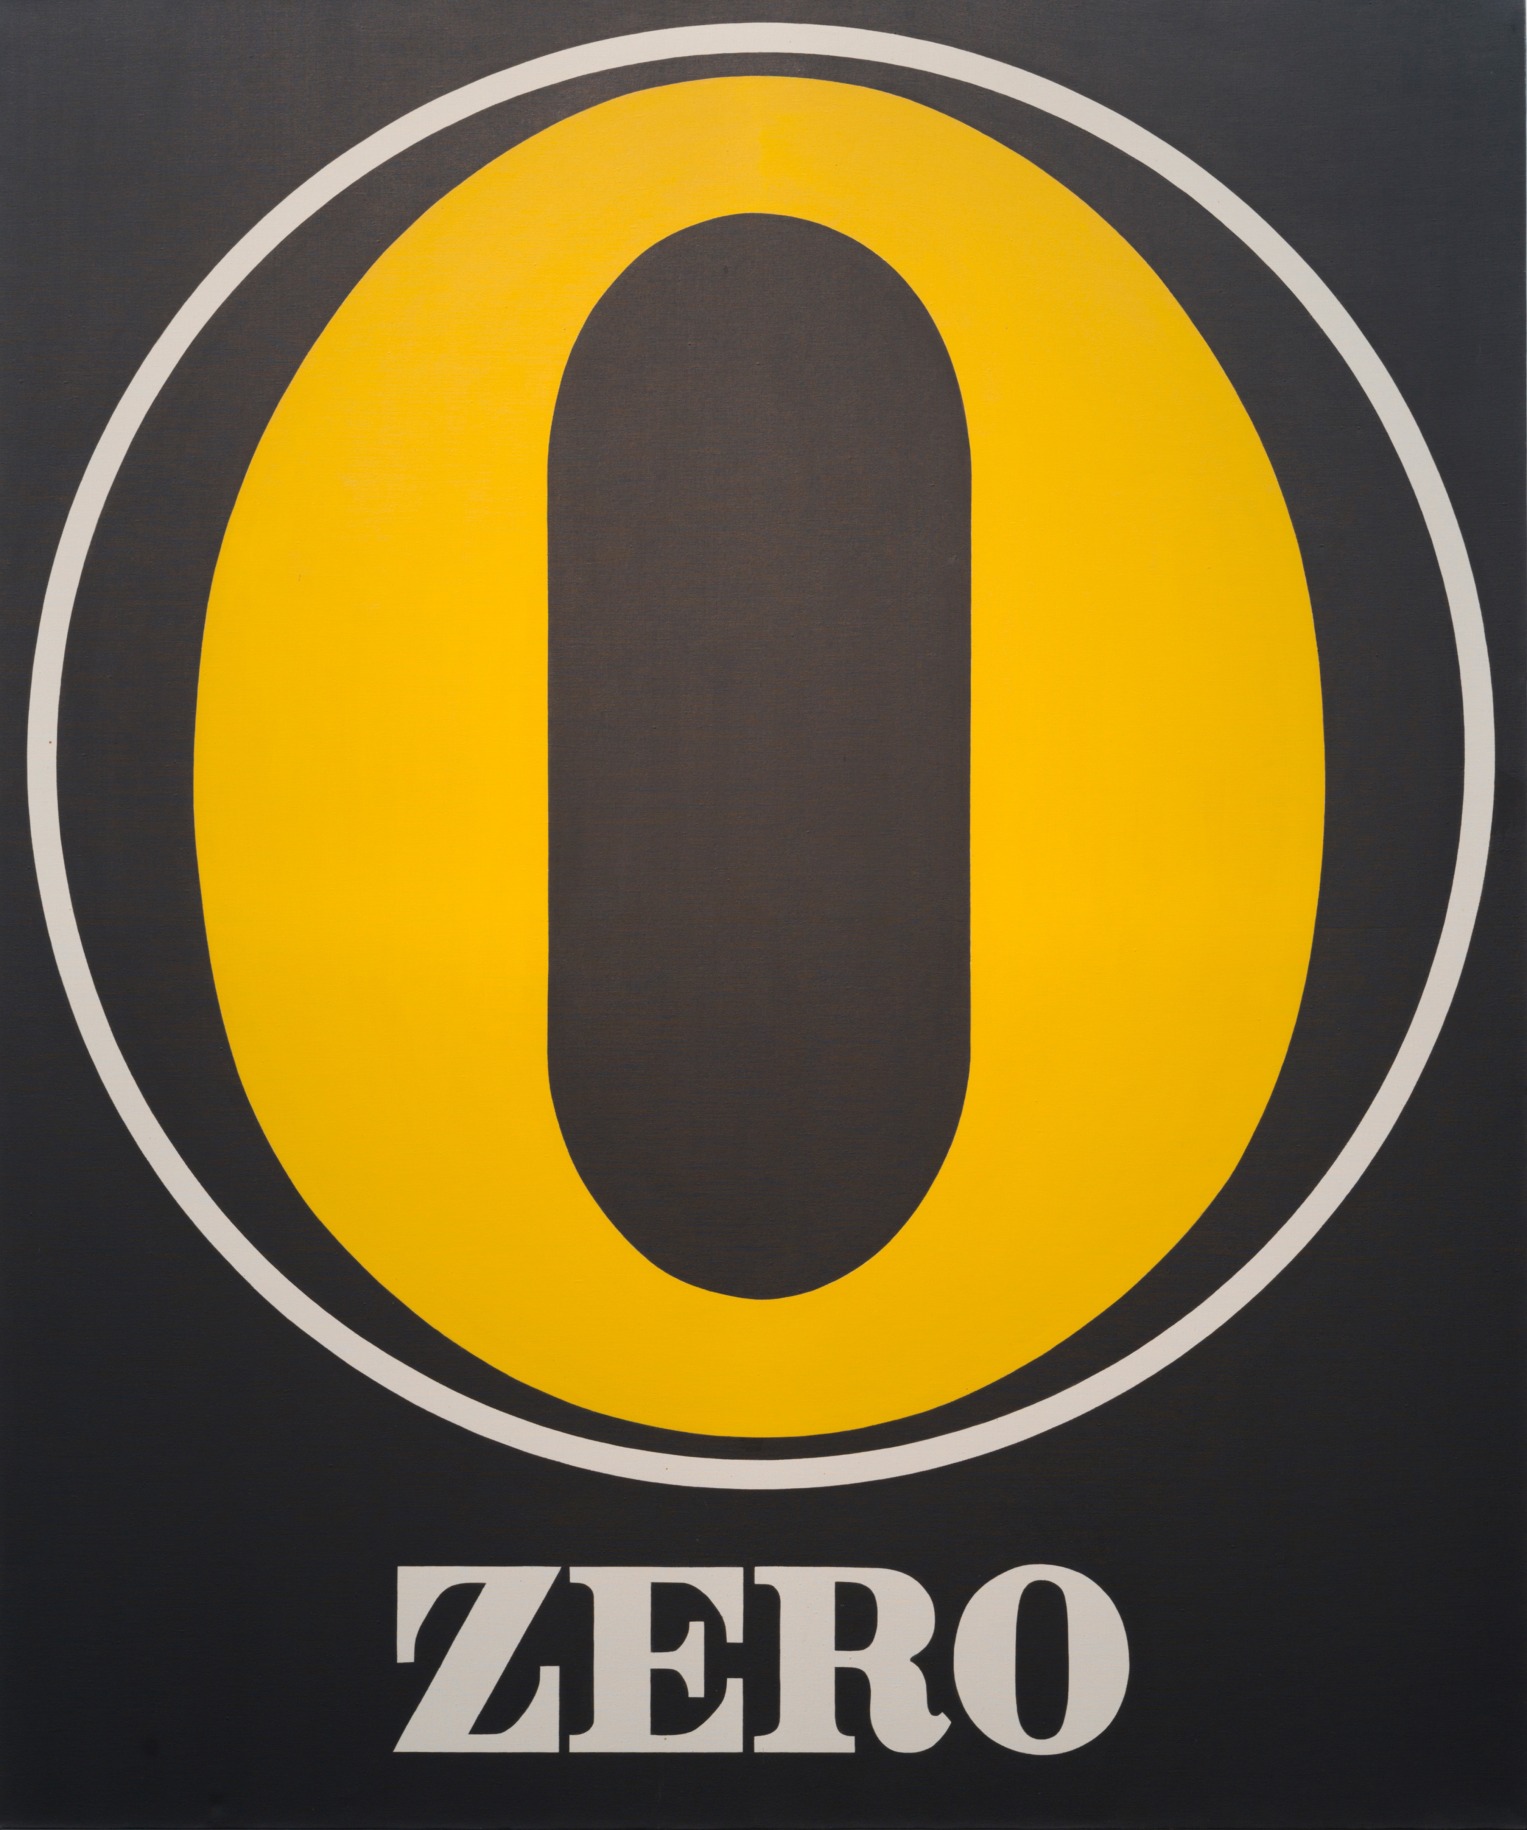 Golden Zero is a 60 by 50 inch black canvas with ZERO painted in white letters at the bottom. Dominating the canvas is a golden yellow numeral zero within a black circle with a white outline.